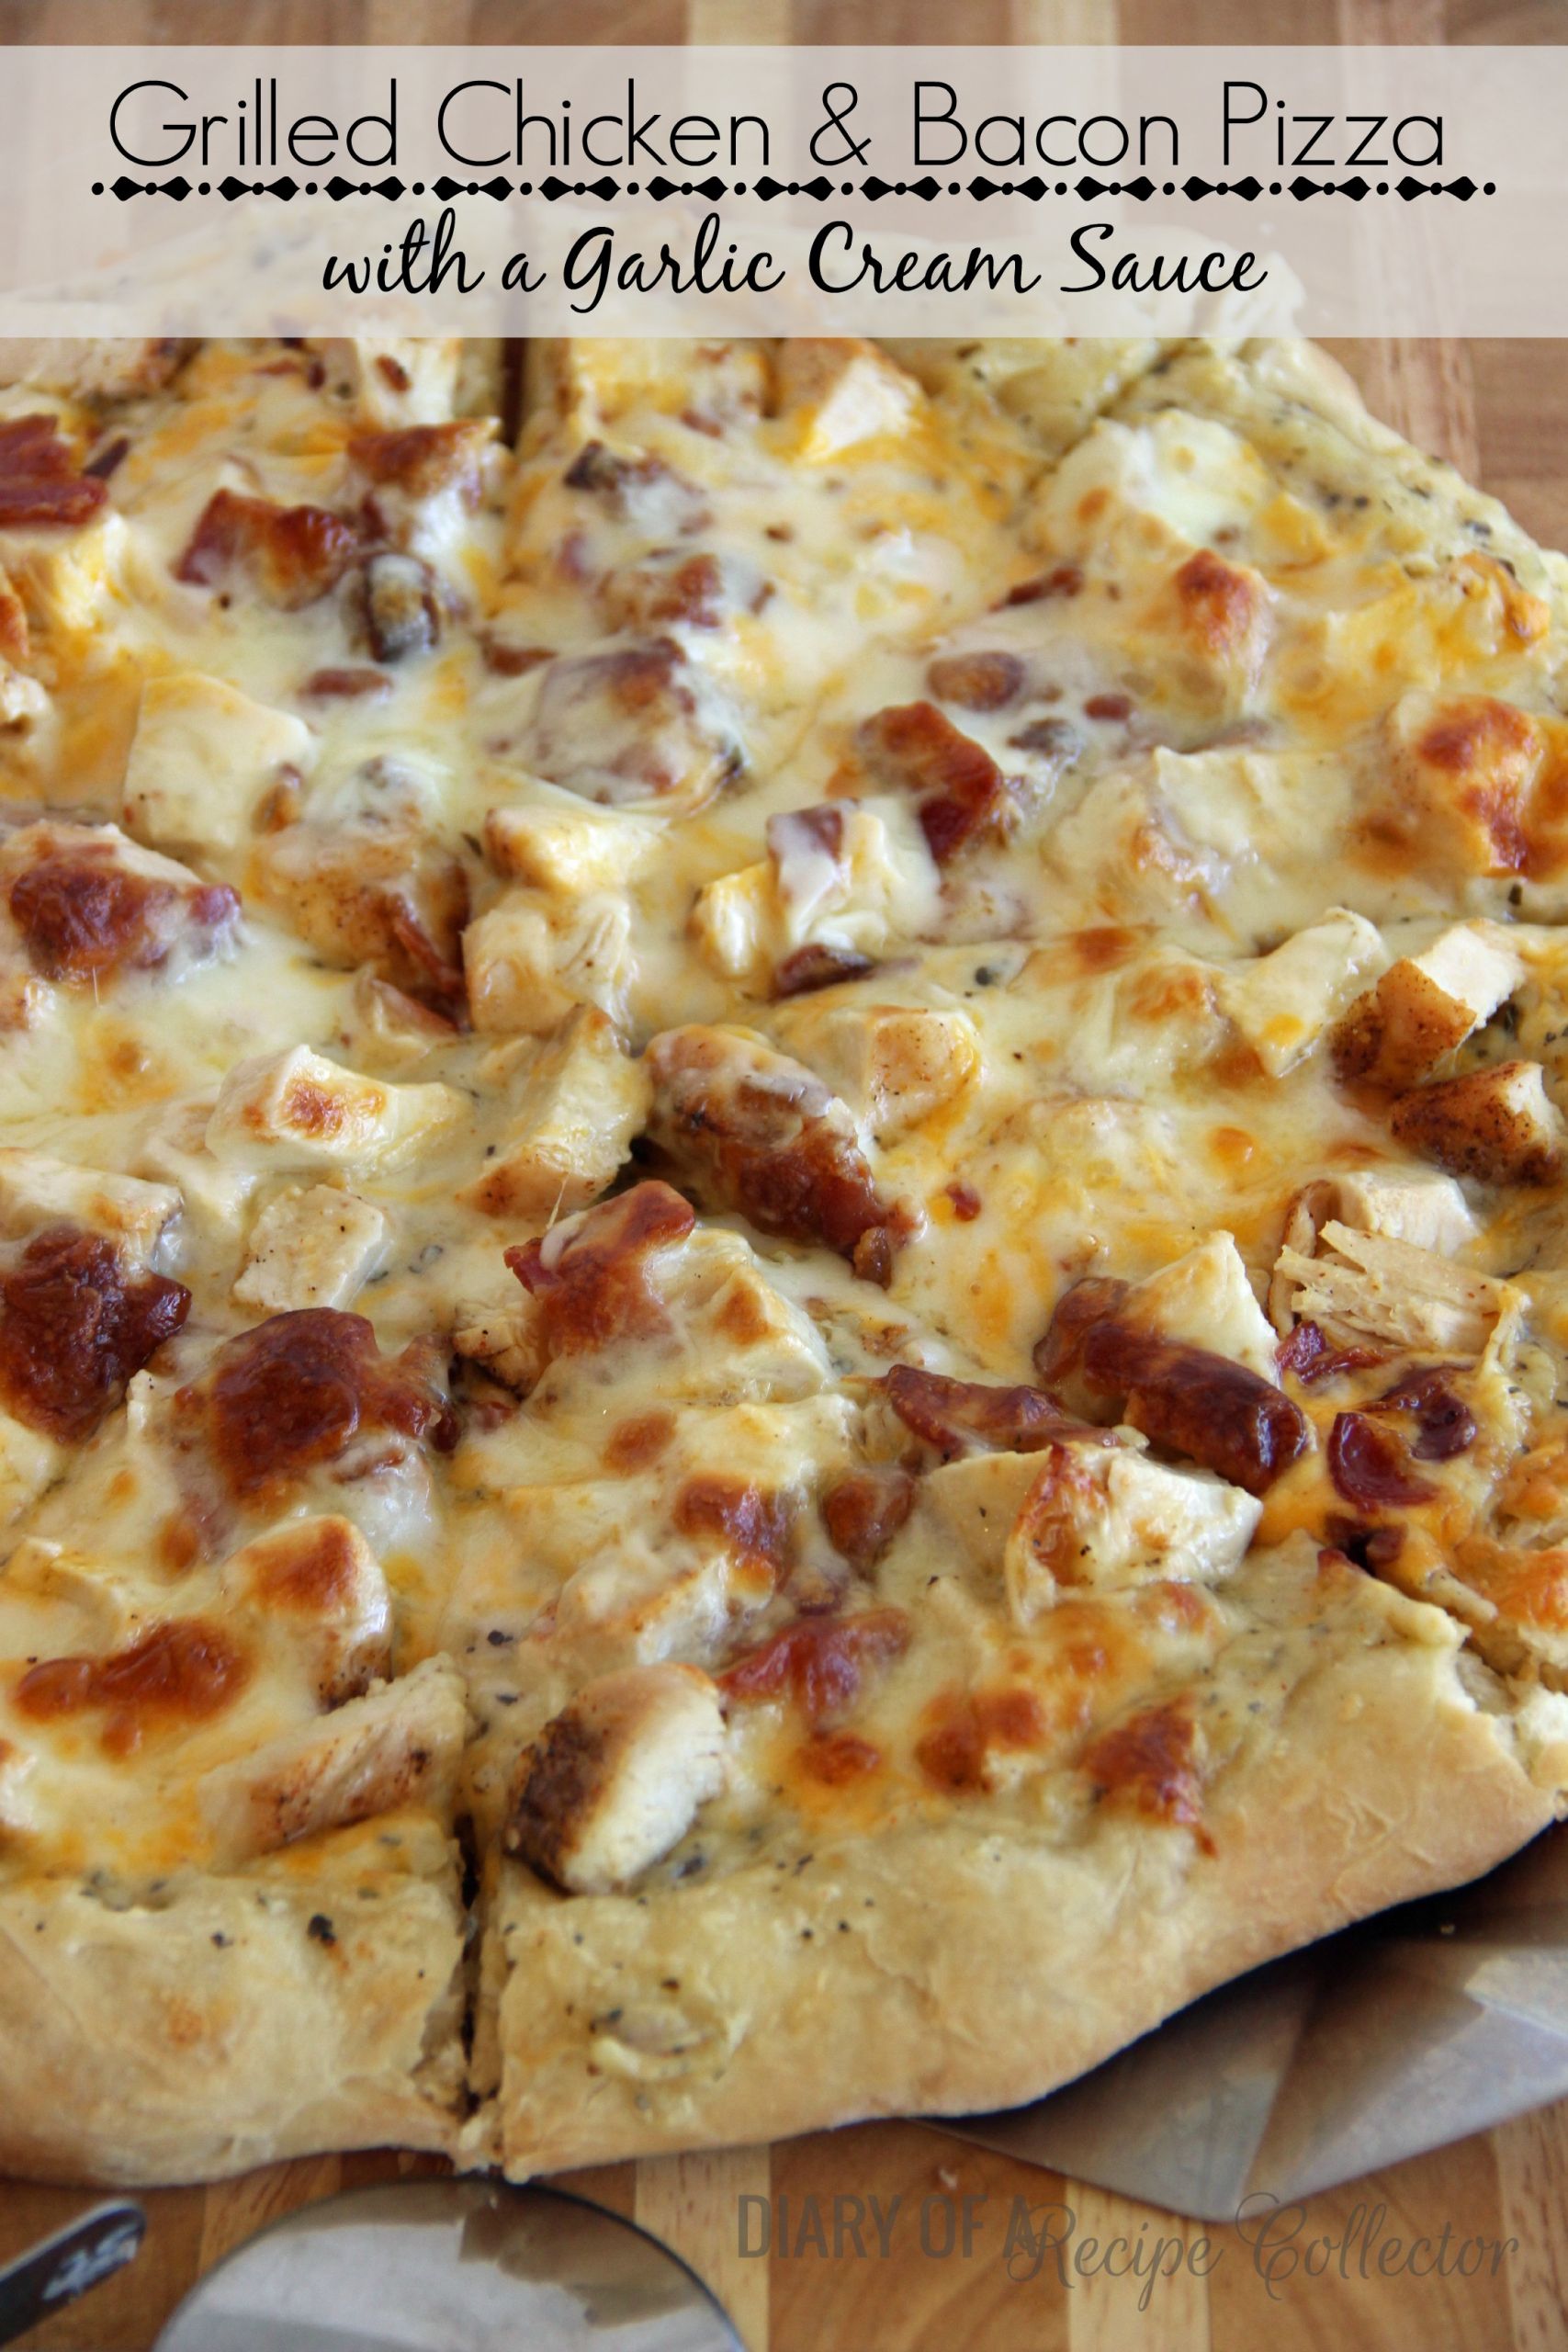 Grilled Chicken Pizza
 Grilled Chicken & Bacon Pizza with a Garlic Cream Sauce